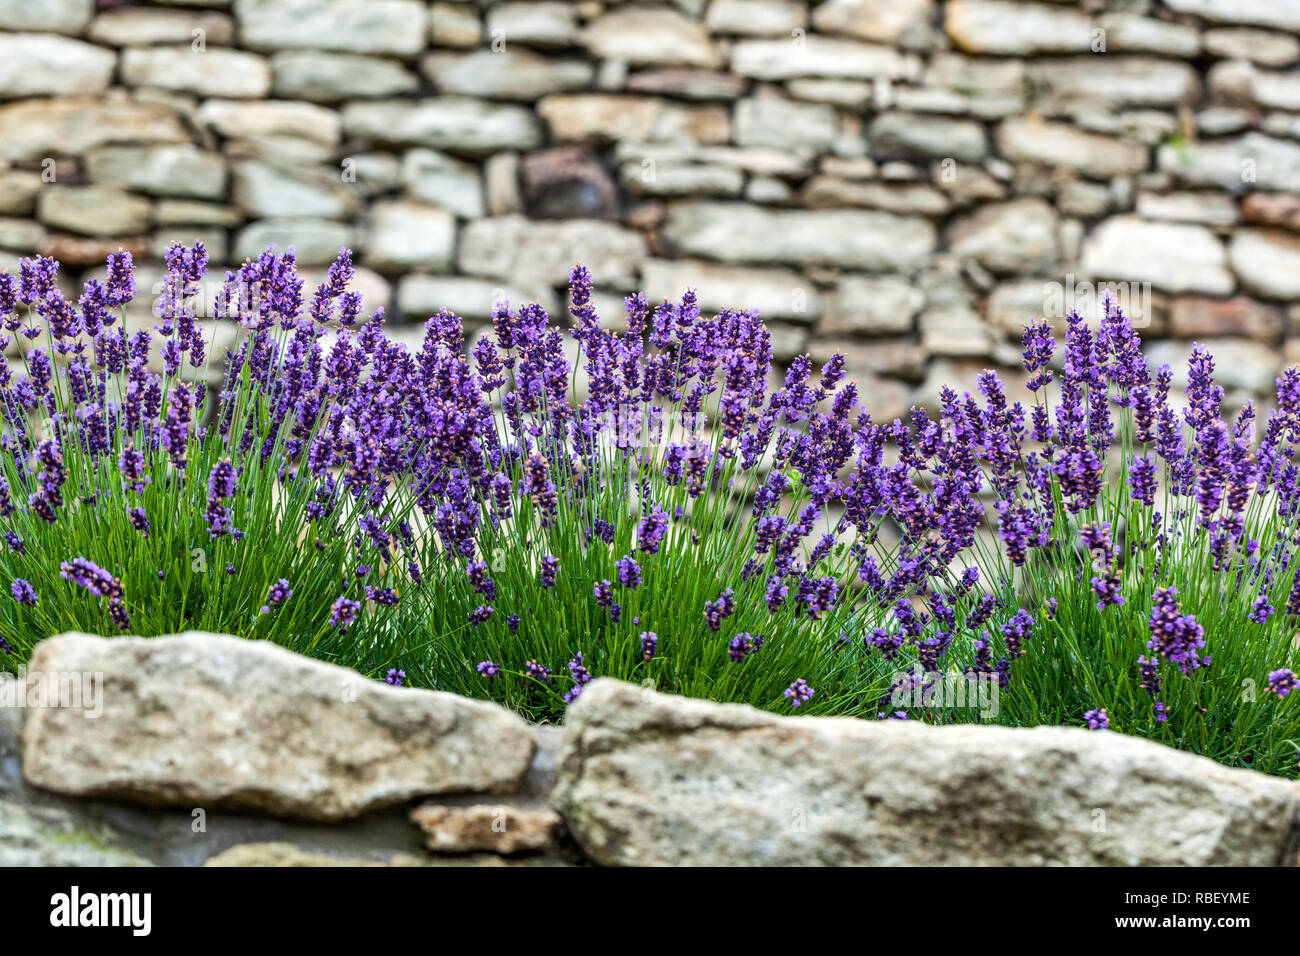 Lavender garden blue flowers growing on stone wall Stock Photo